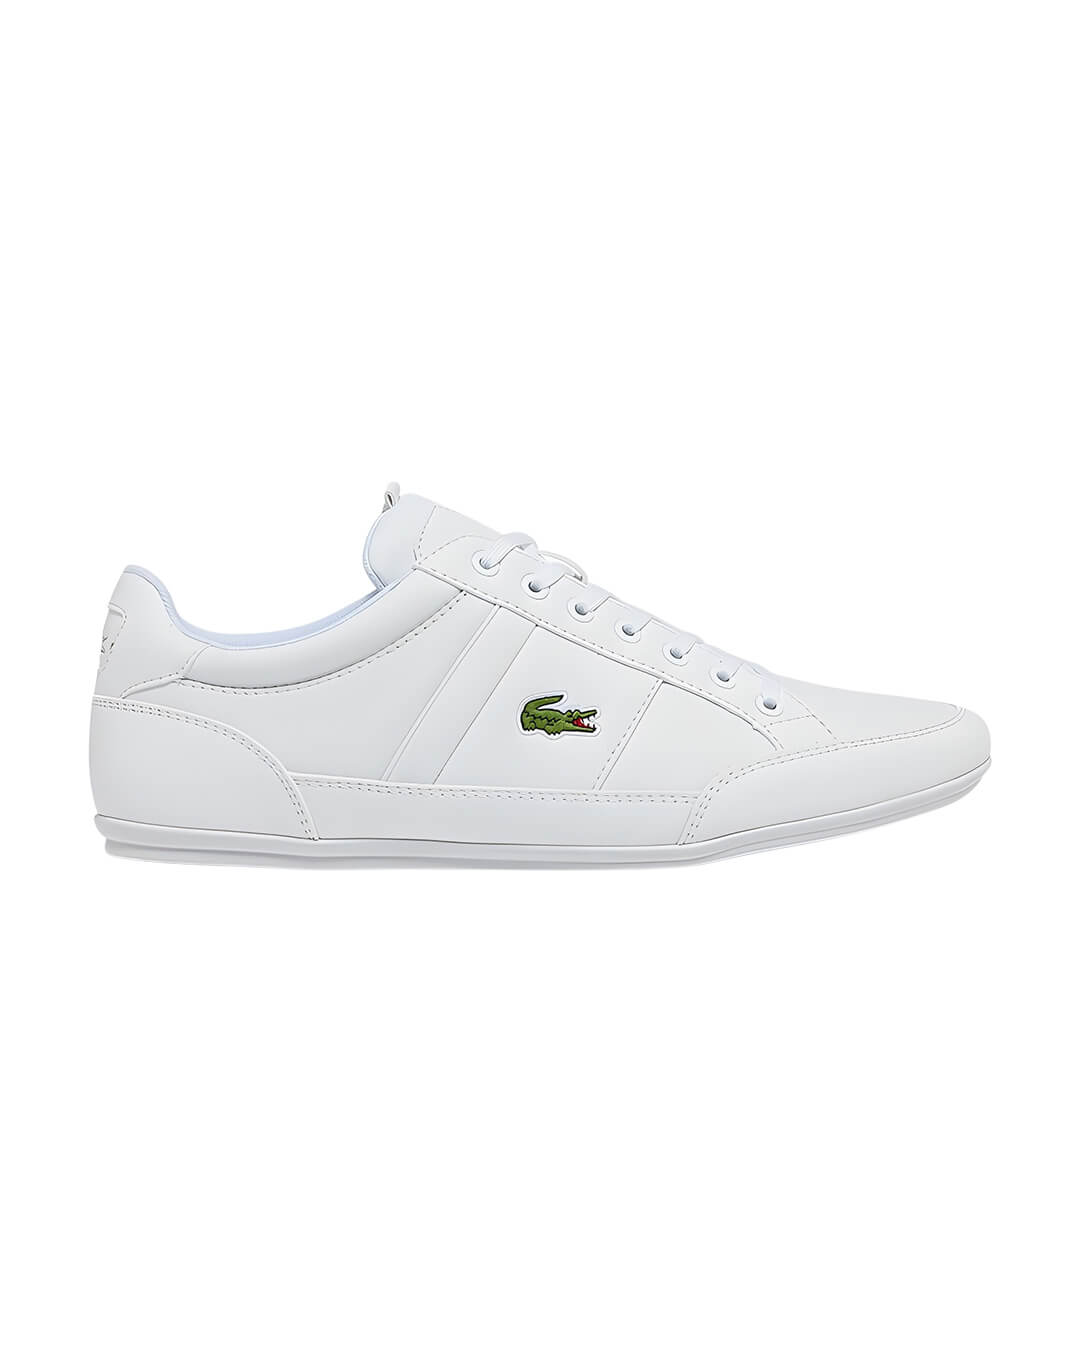 Lacoste Shoes Lacoste Chaymon White Sneakers